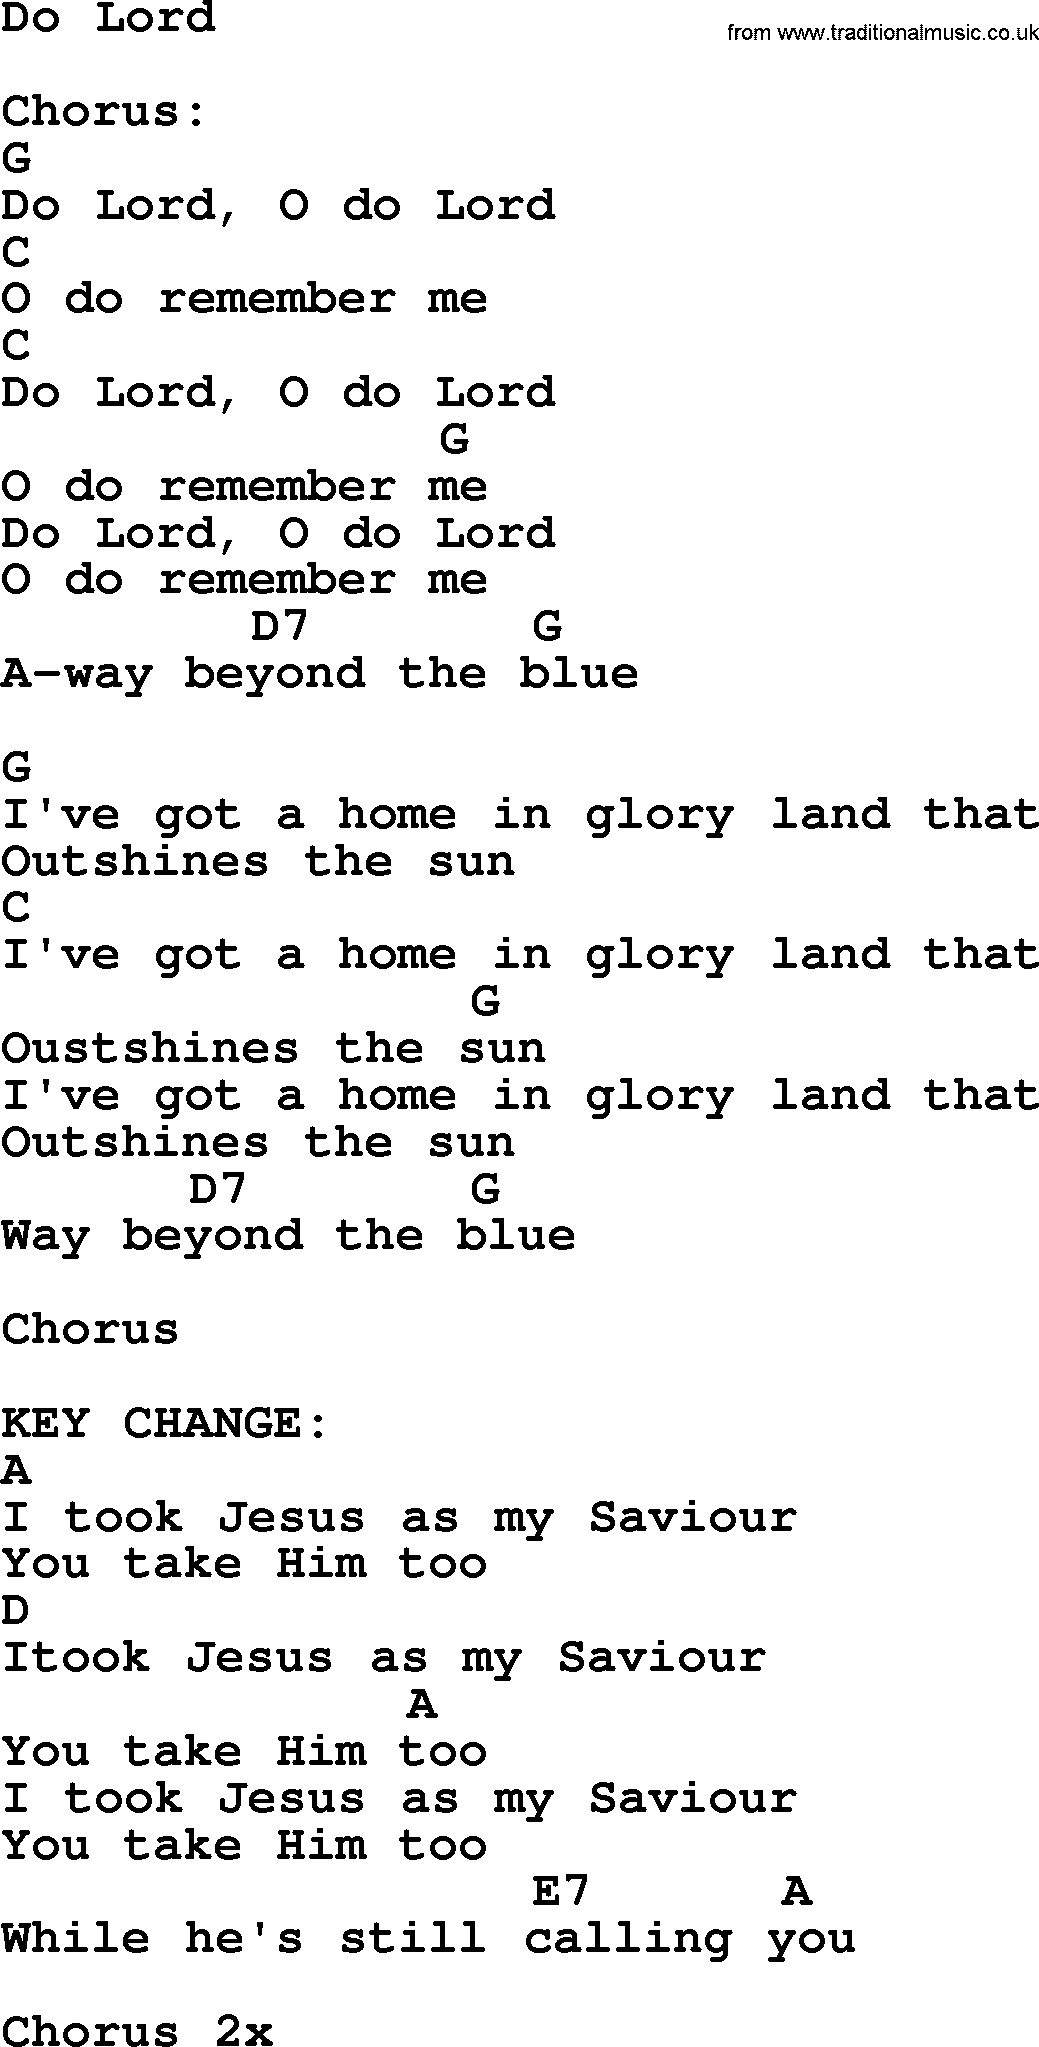 Johnny Cash song Do Lord, lyrics and chords